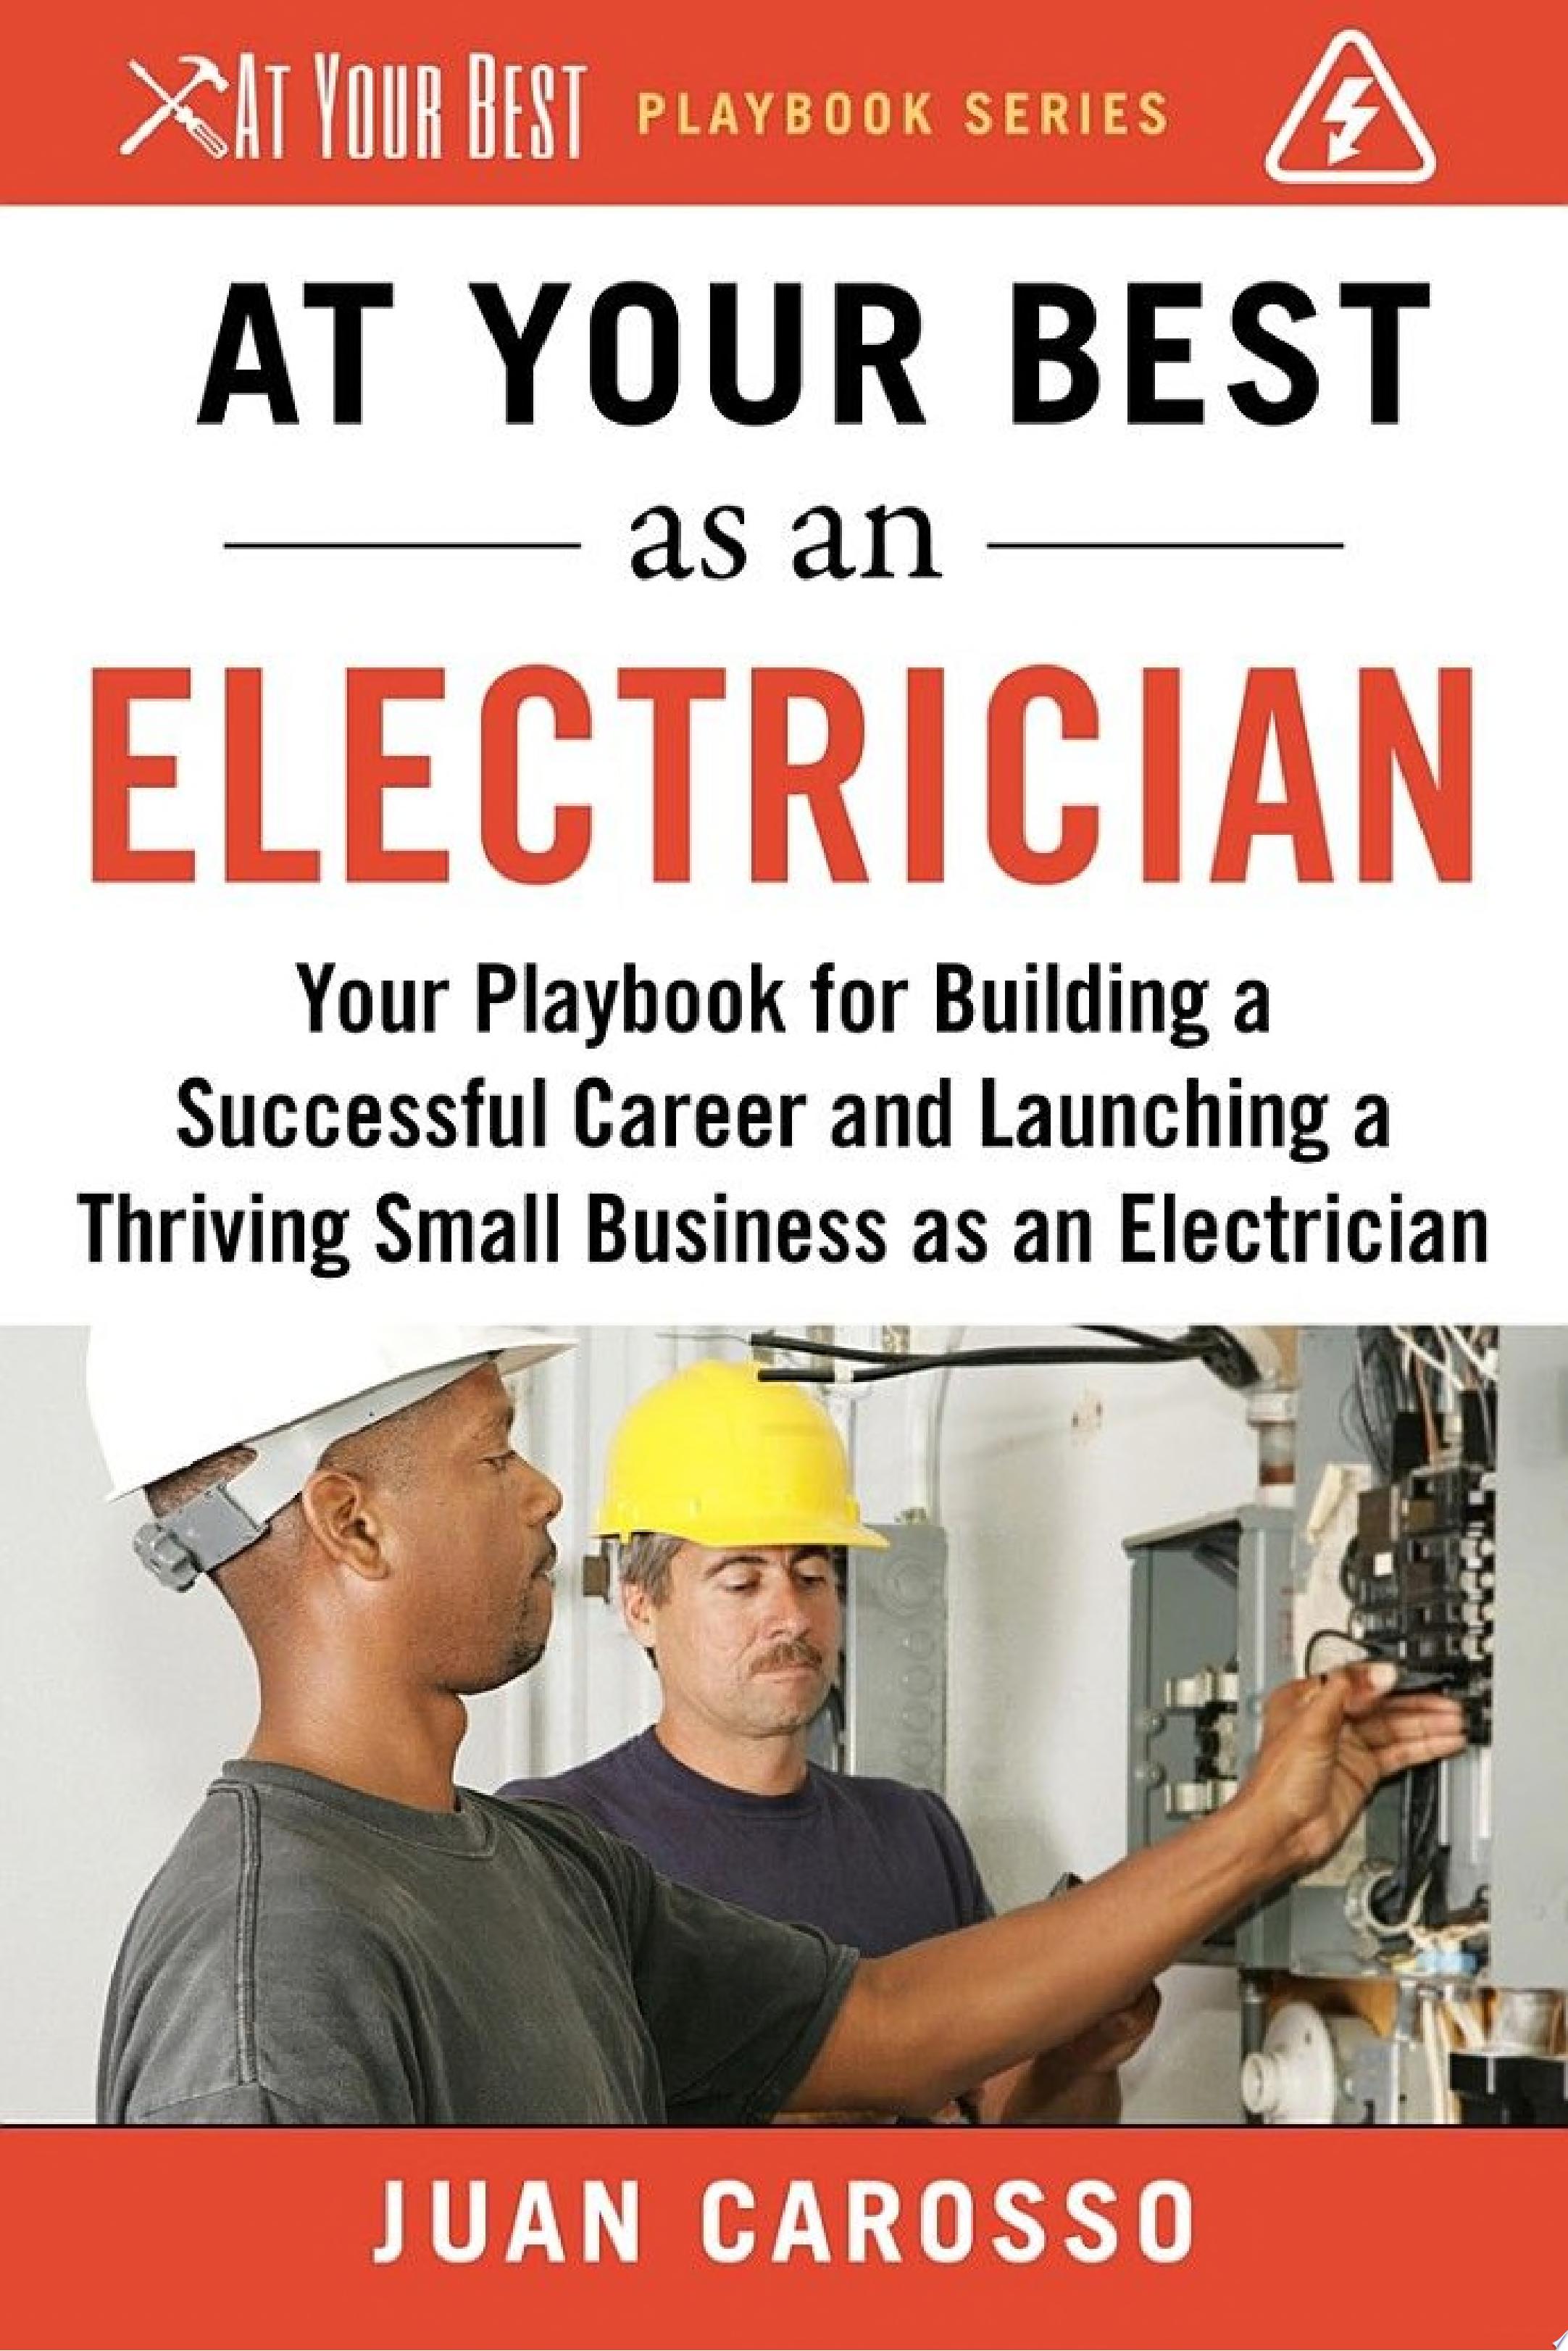 Image for "At Your Best as an Electrician"